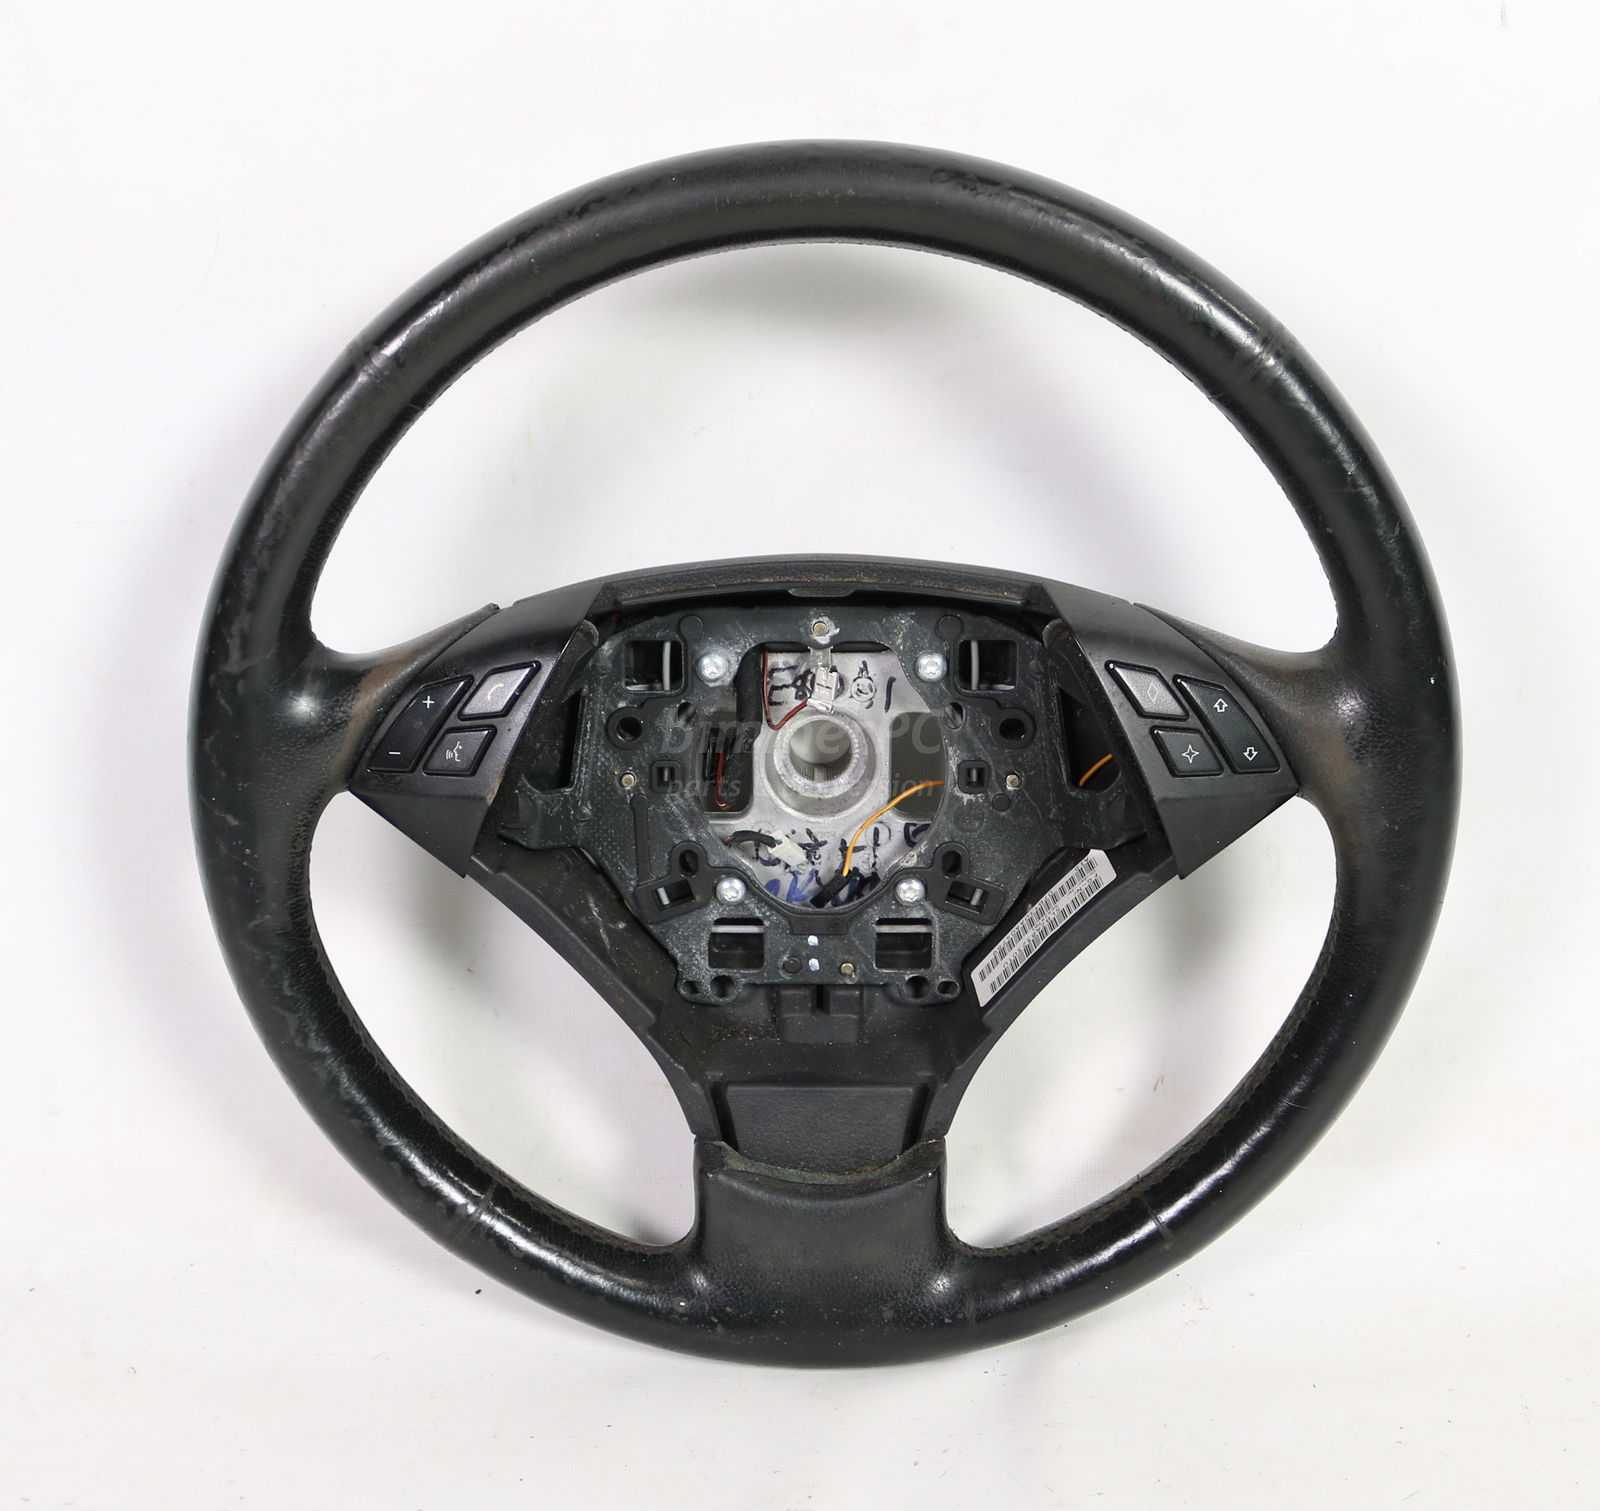 BMW E60 5-Series Factory Heated Leather Steering Wheel w Controls 2008-2010 OEM - $69.29